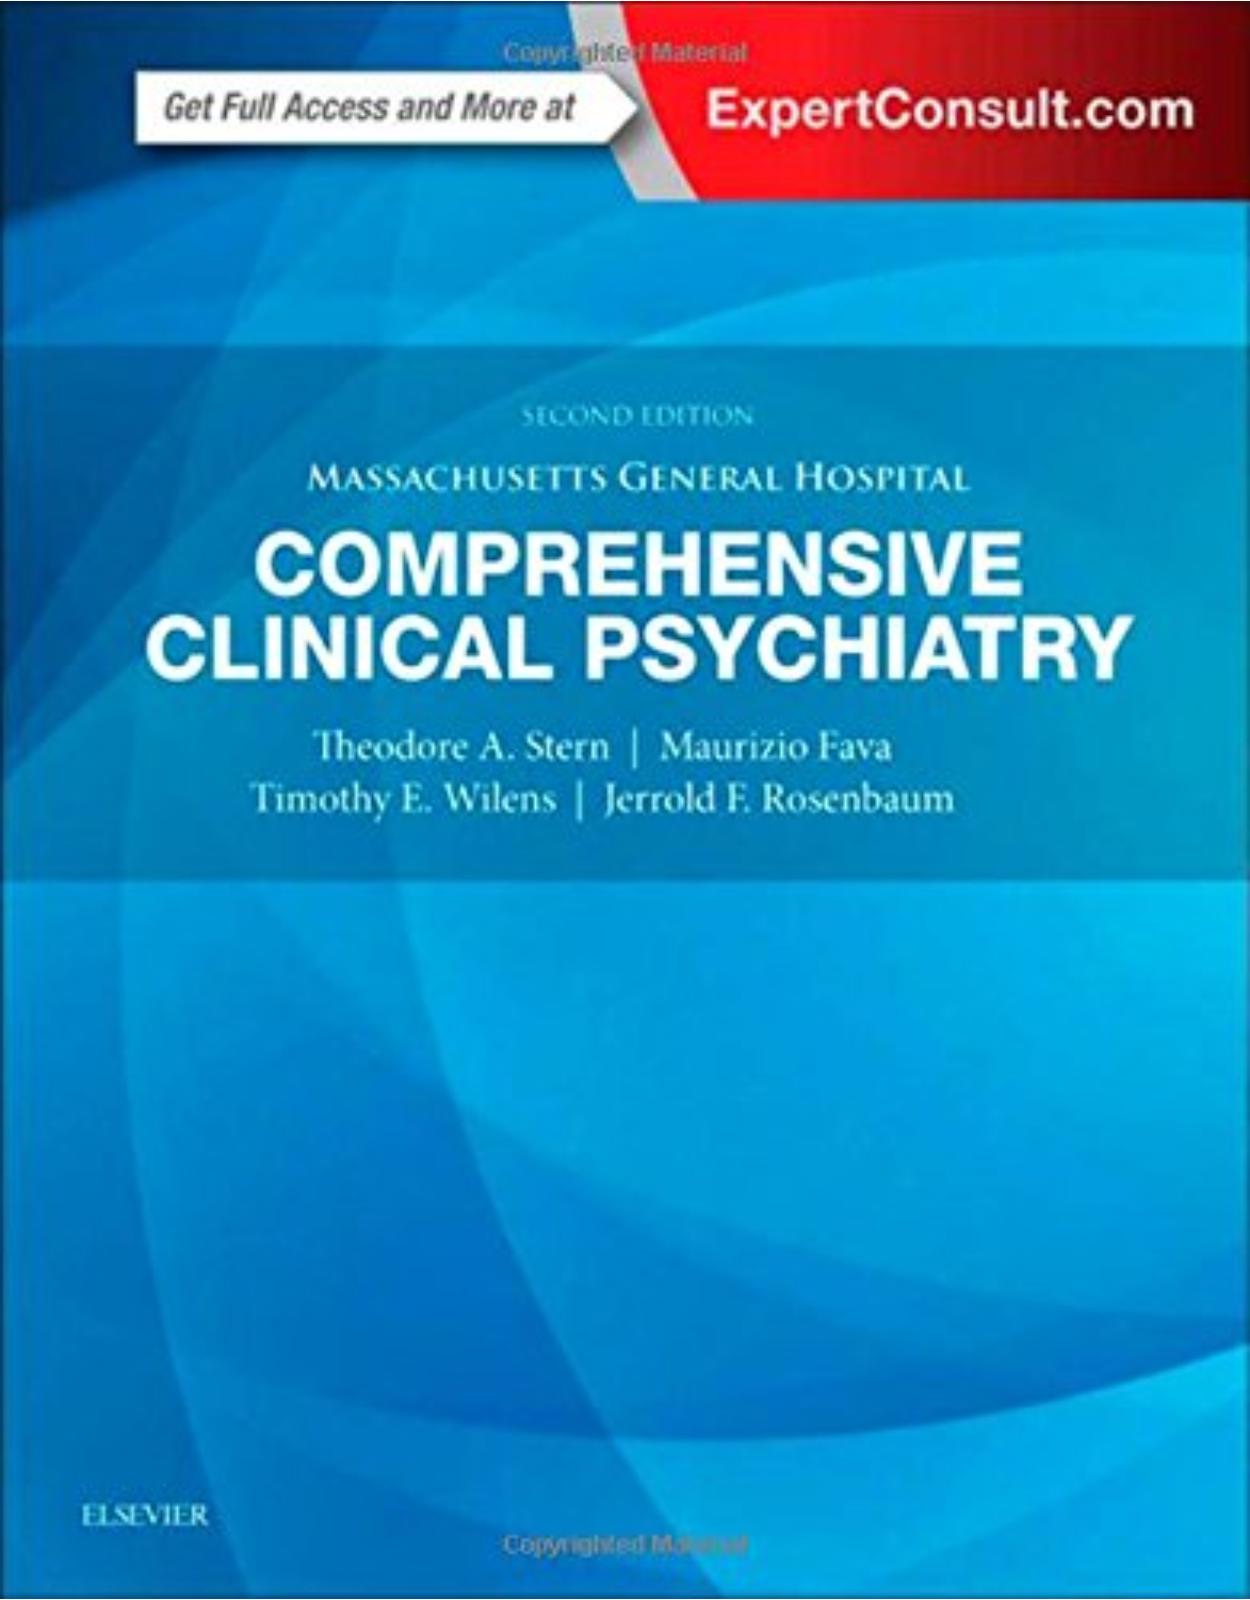 Massachusetts General Hospital Comprehensive Clinical Psychiatry, 2nd Edition 